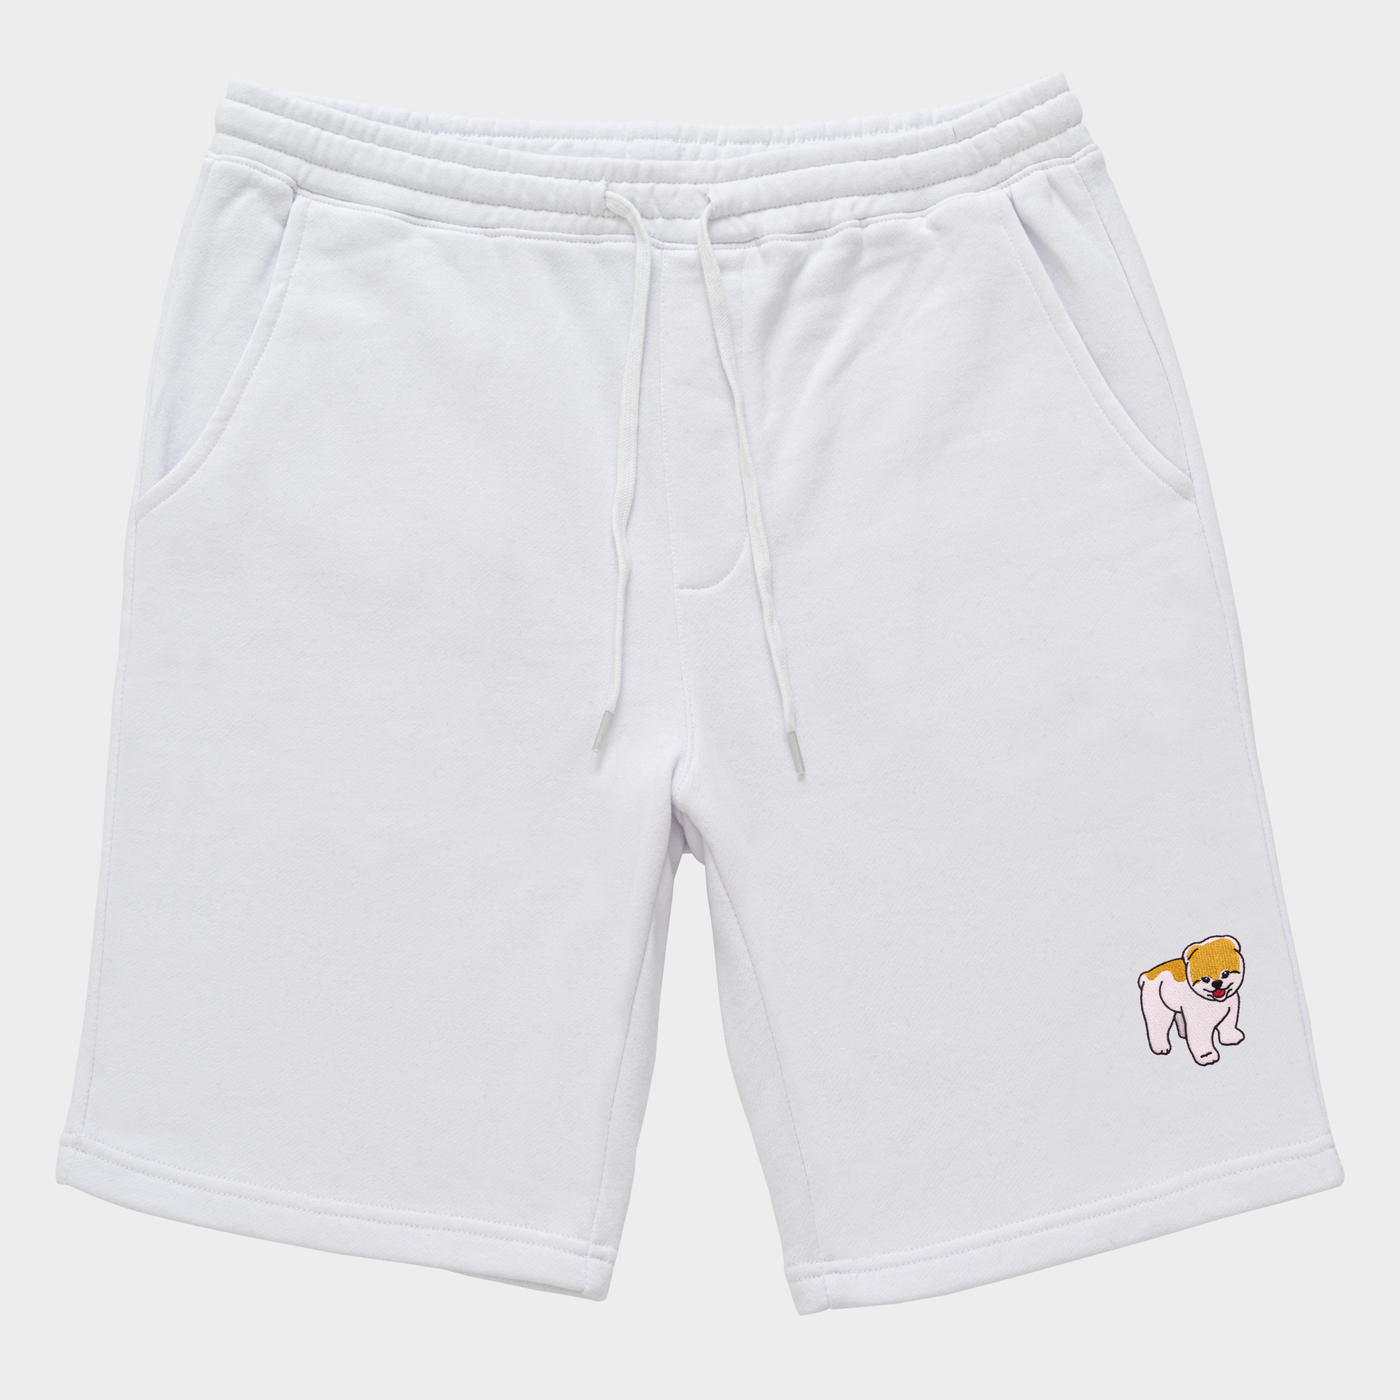 Bobby's Planet Men's Embroidered Pomeranian Shorts from Paws Dog Cat Animals Collection in White Color#color_white